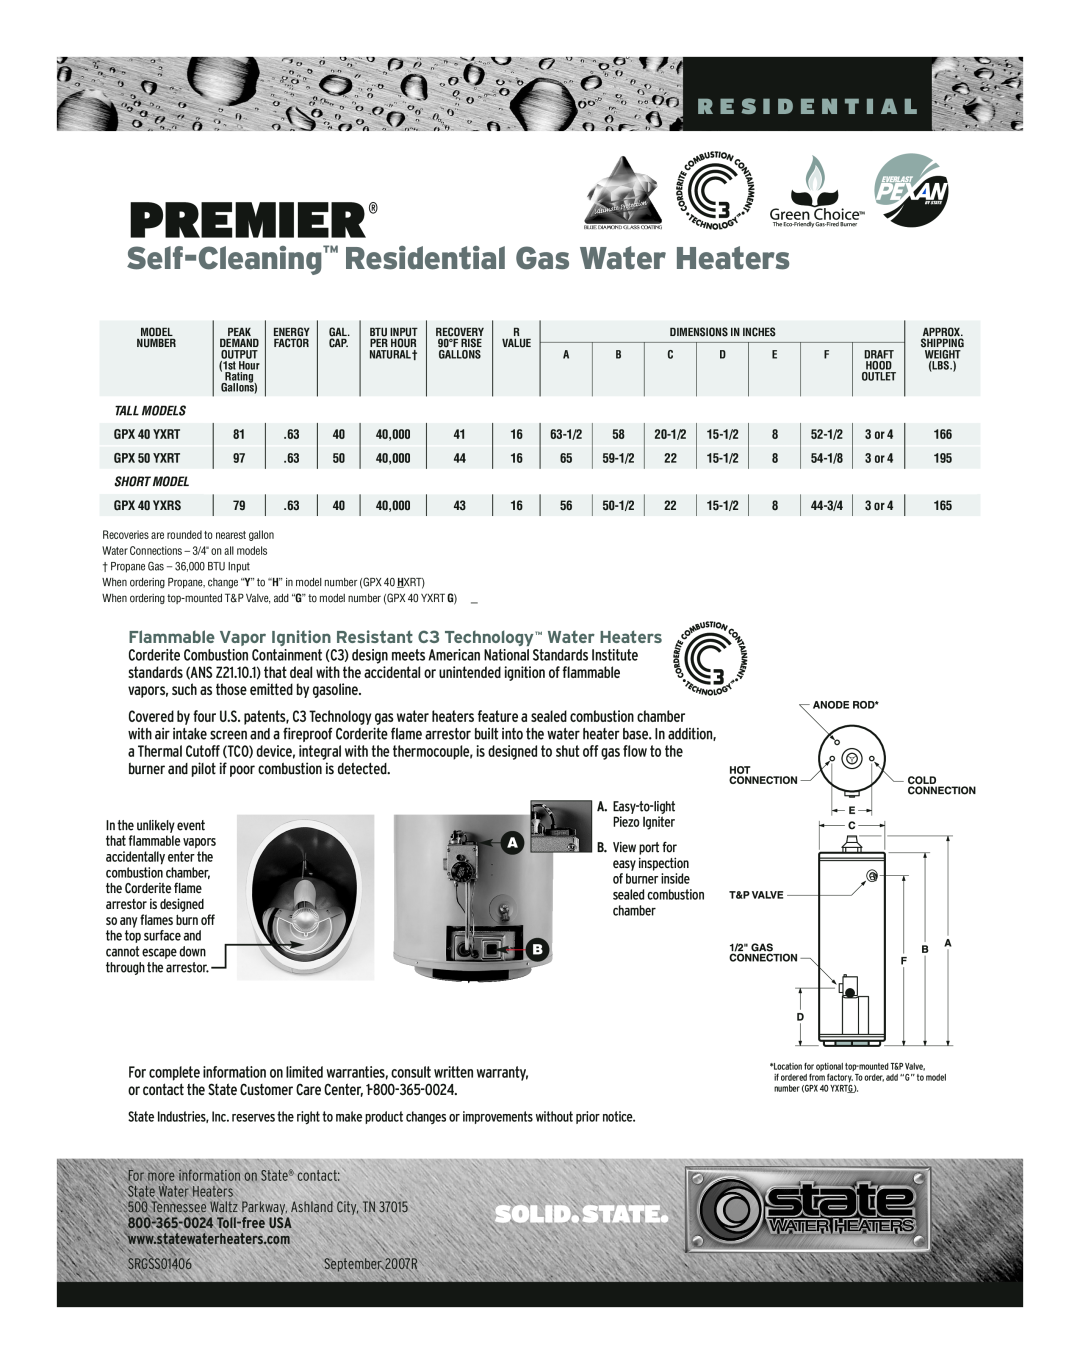 Premier GPX 40 HXRT Premier, Self-Cleaning Residential Gas Water Heaters, R E S I D E N T I A L, SRGSS01406, Tall Models 